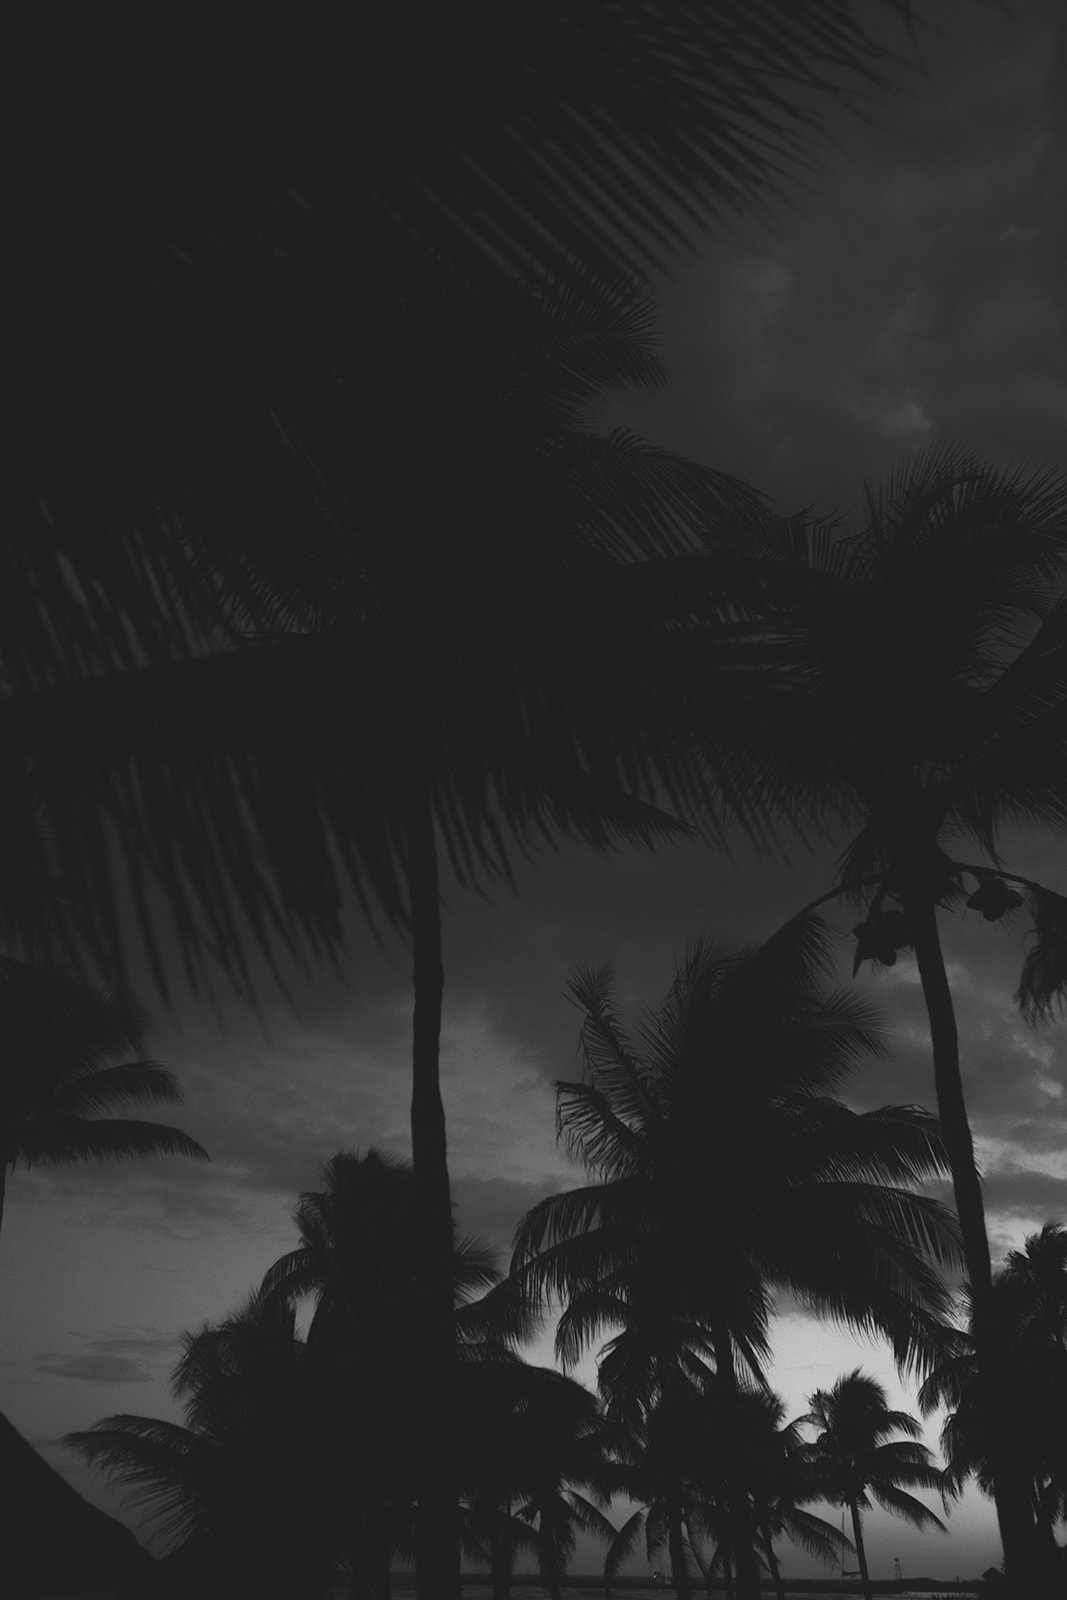 Black and white moody portrait of the stormy skies in Mexico, with palm trees blowing in the wind. 